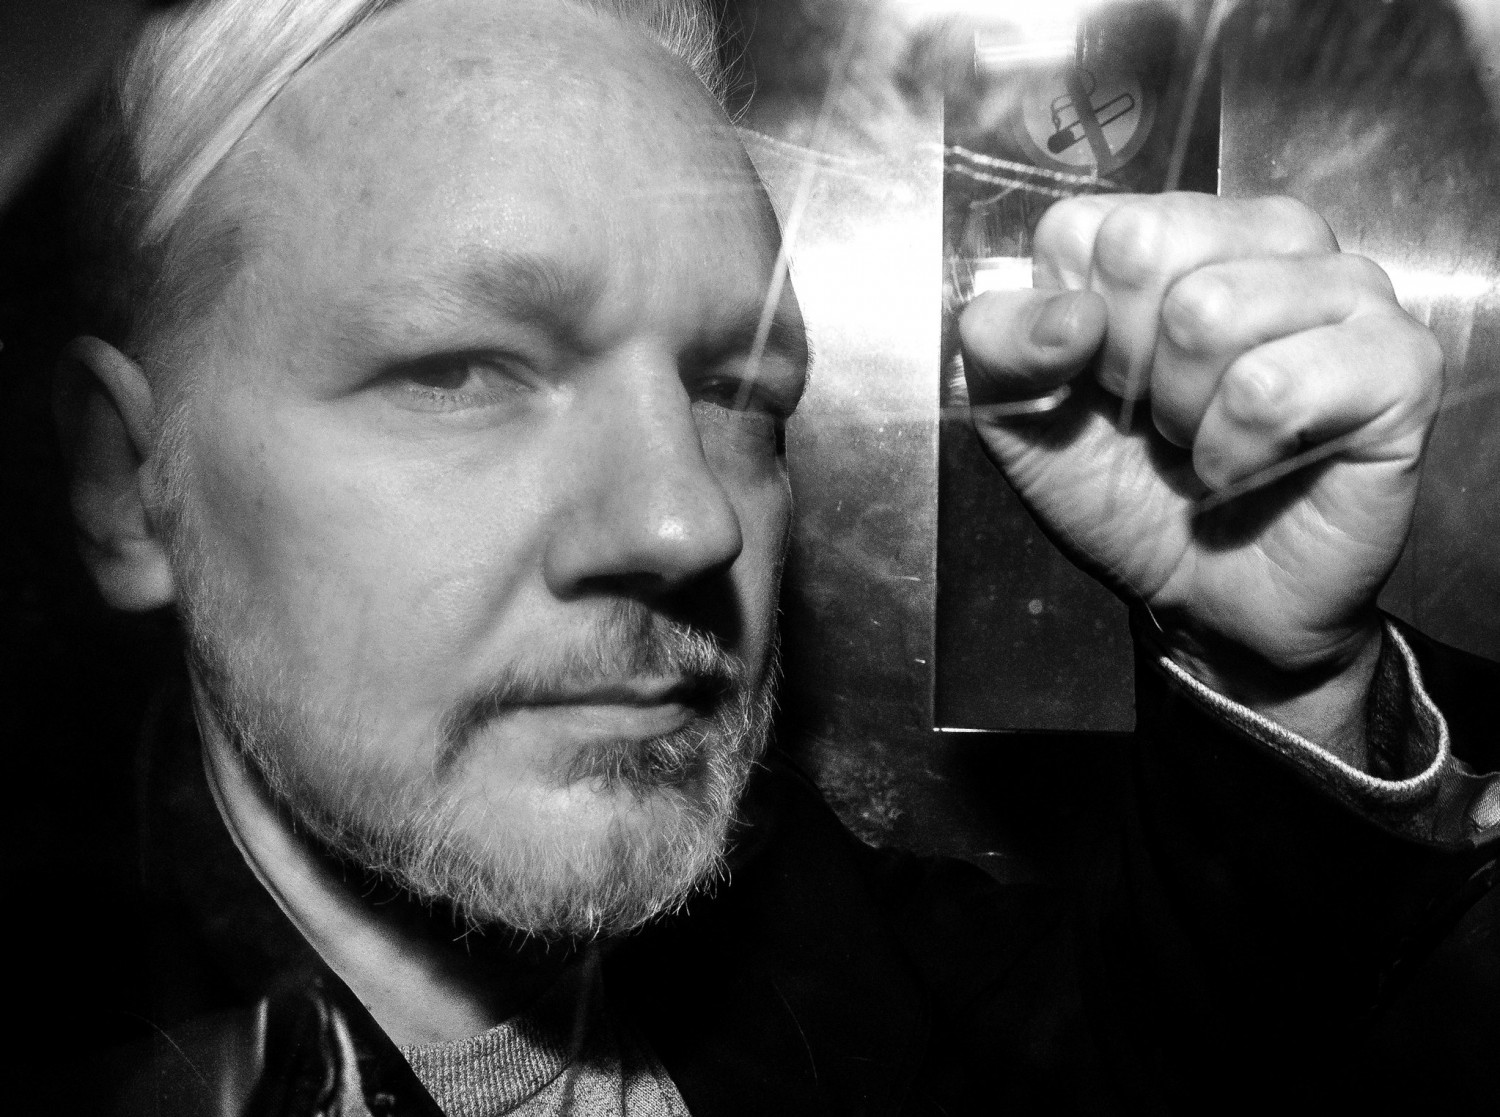 The indictment of the WikiLeaks founder Julian Assange, like many attacks on democracy, is novel but rooted in a long devolution of American institutions—it is a leap, but from a running start.Photograph by Daniel Leal-Olivas / Getty